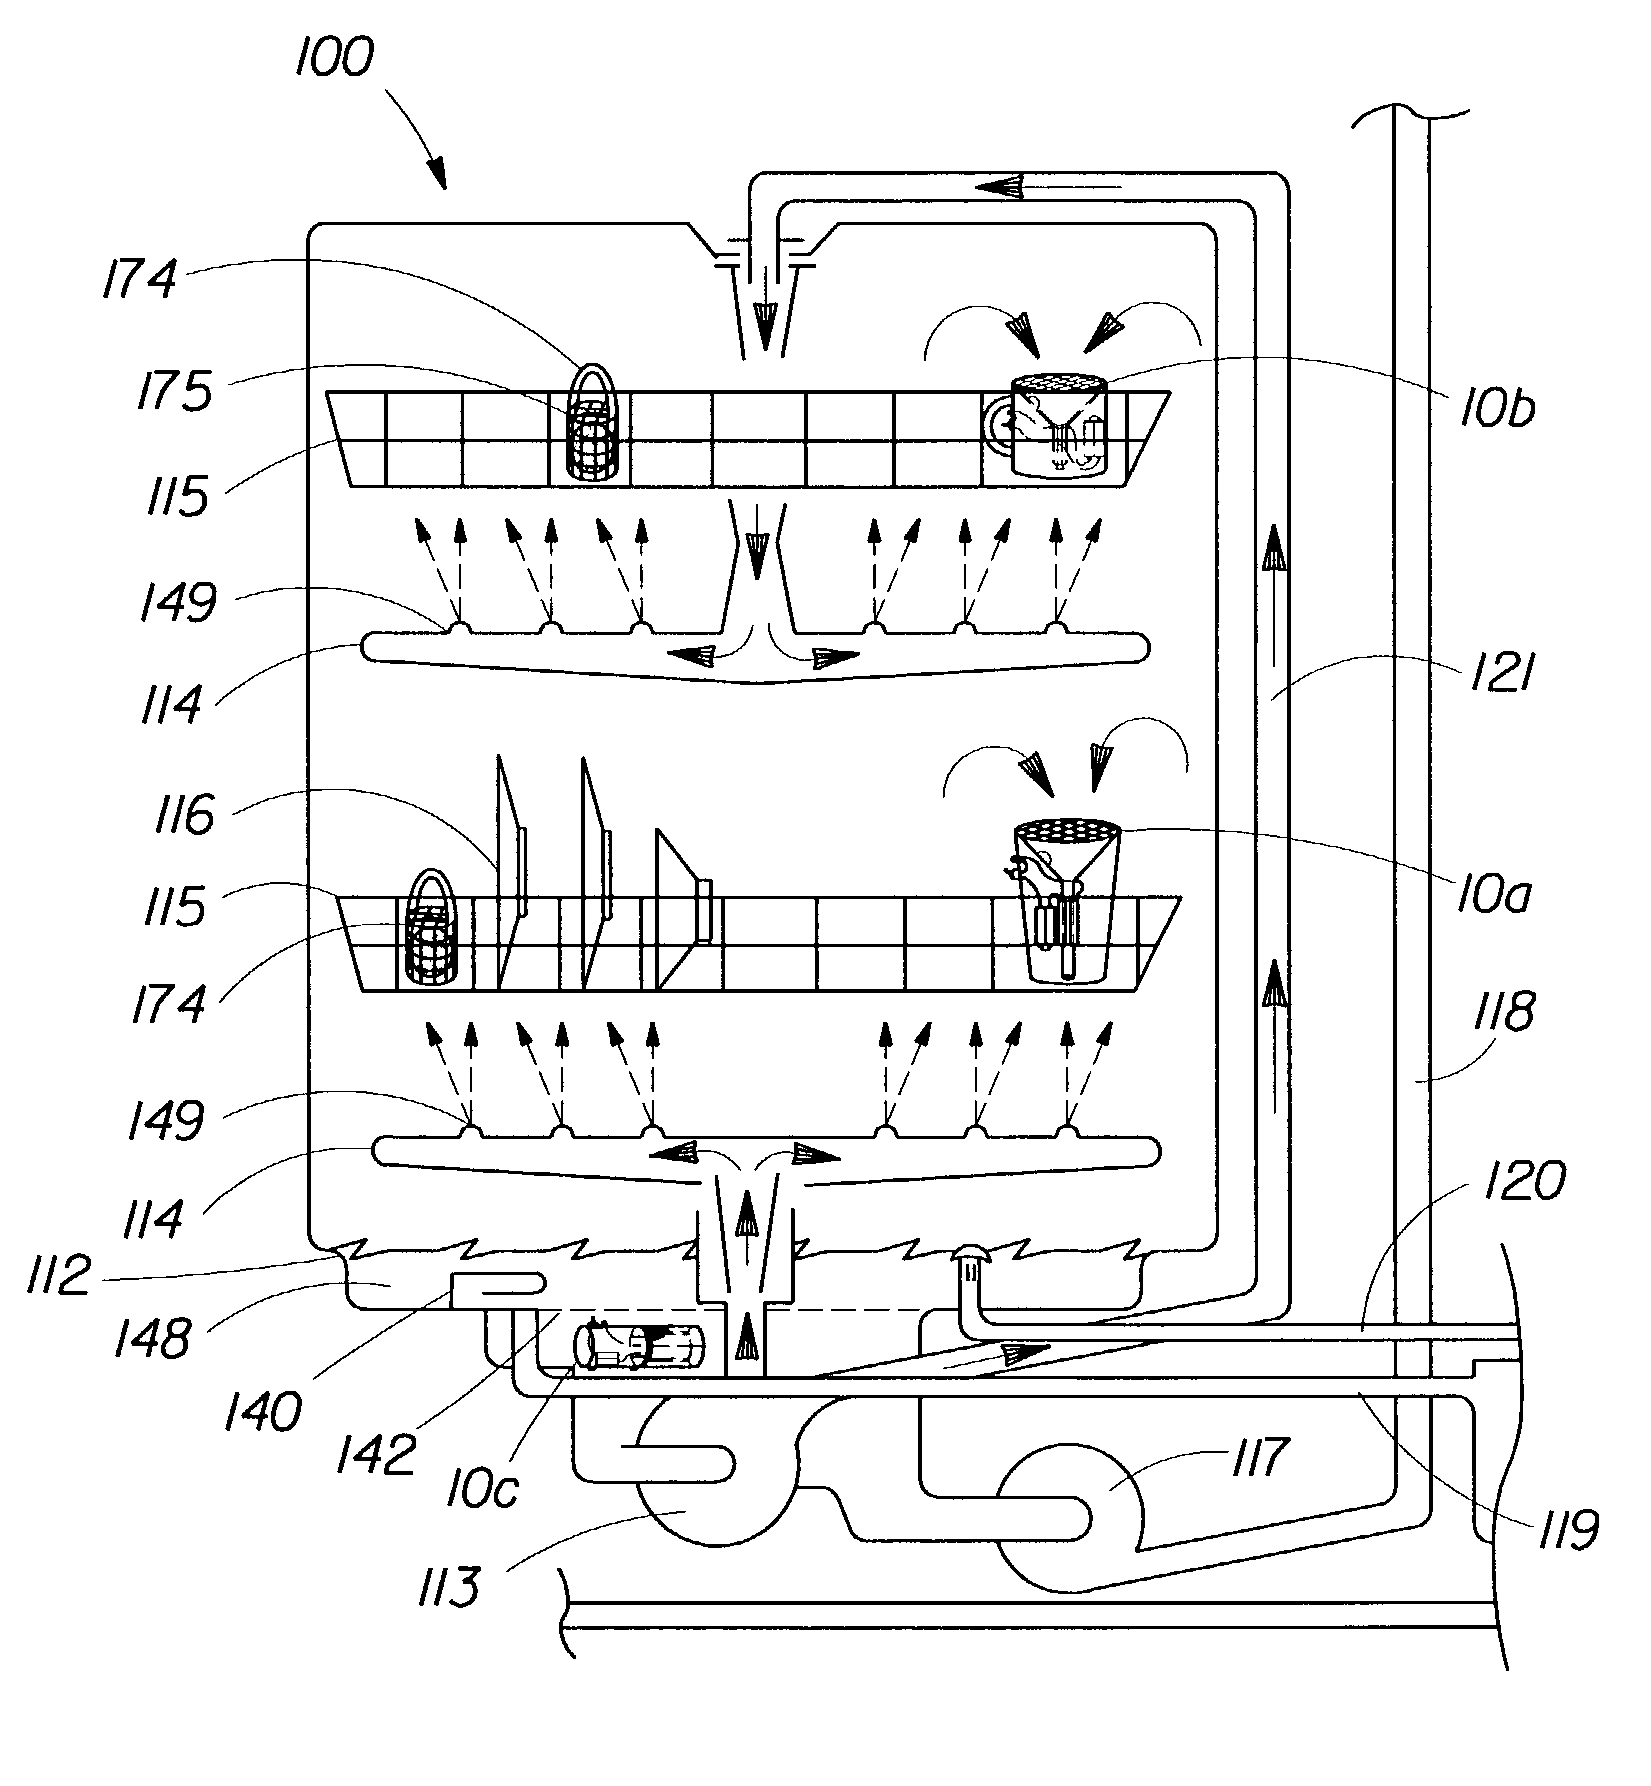 Self-contained, self-powered electrolytic devices for improved performance in automatic dishwashing